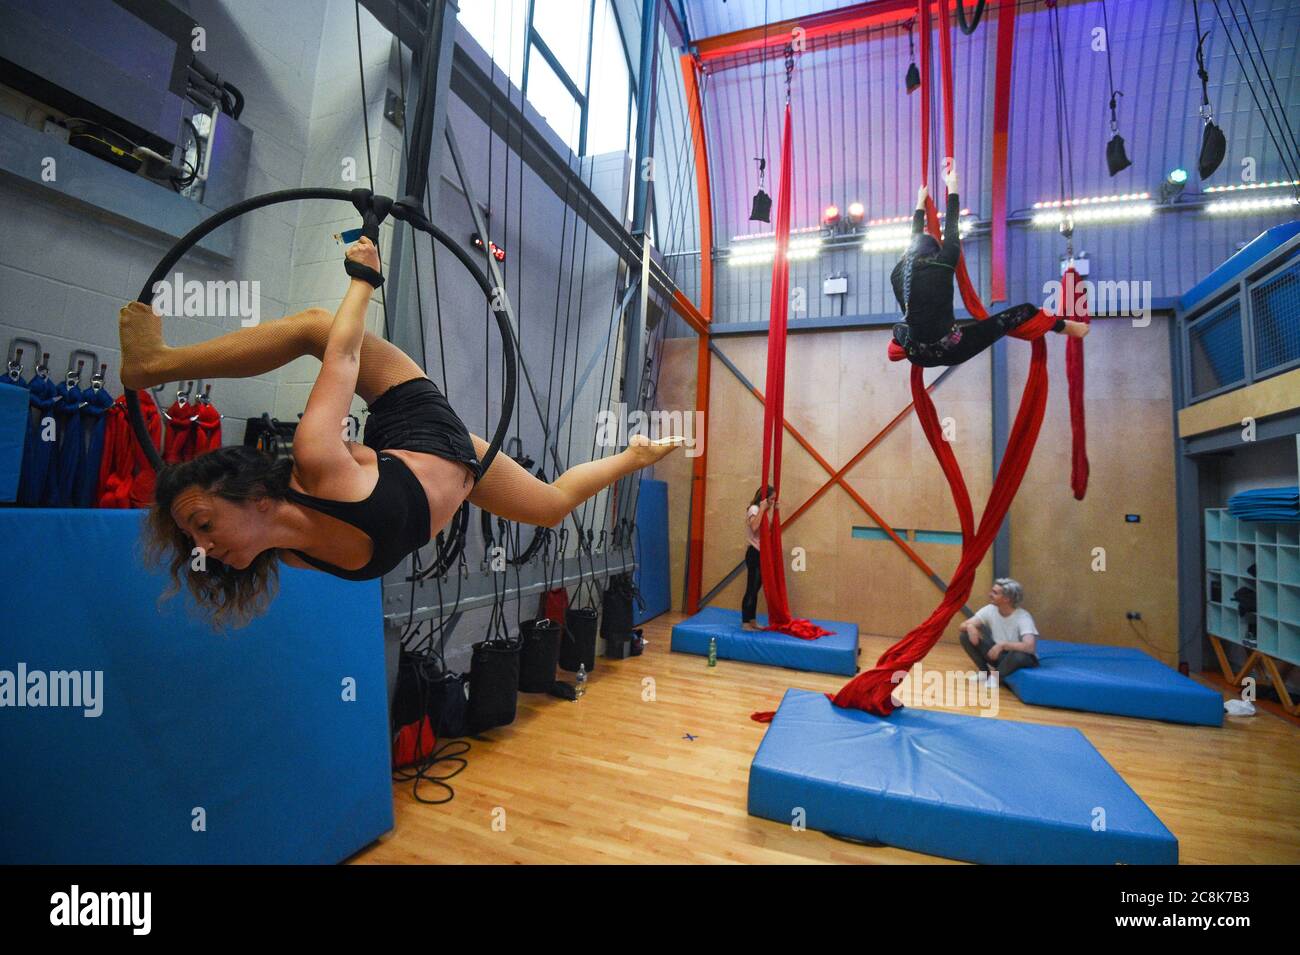 Aerialists practice their skills on ribbons and hoops at Flying Fantastic in Southwark, London, as indoor gyms, swimming pools and sports facilities can reopen as part of the latest easing of coronavirus lockdown measures in England. Stock Photo